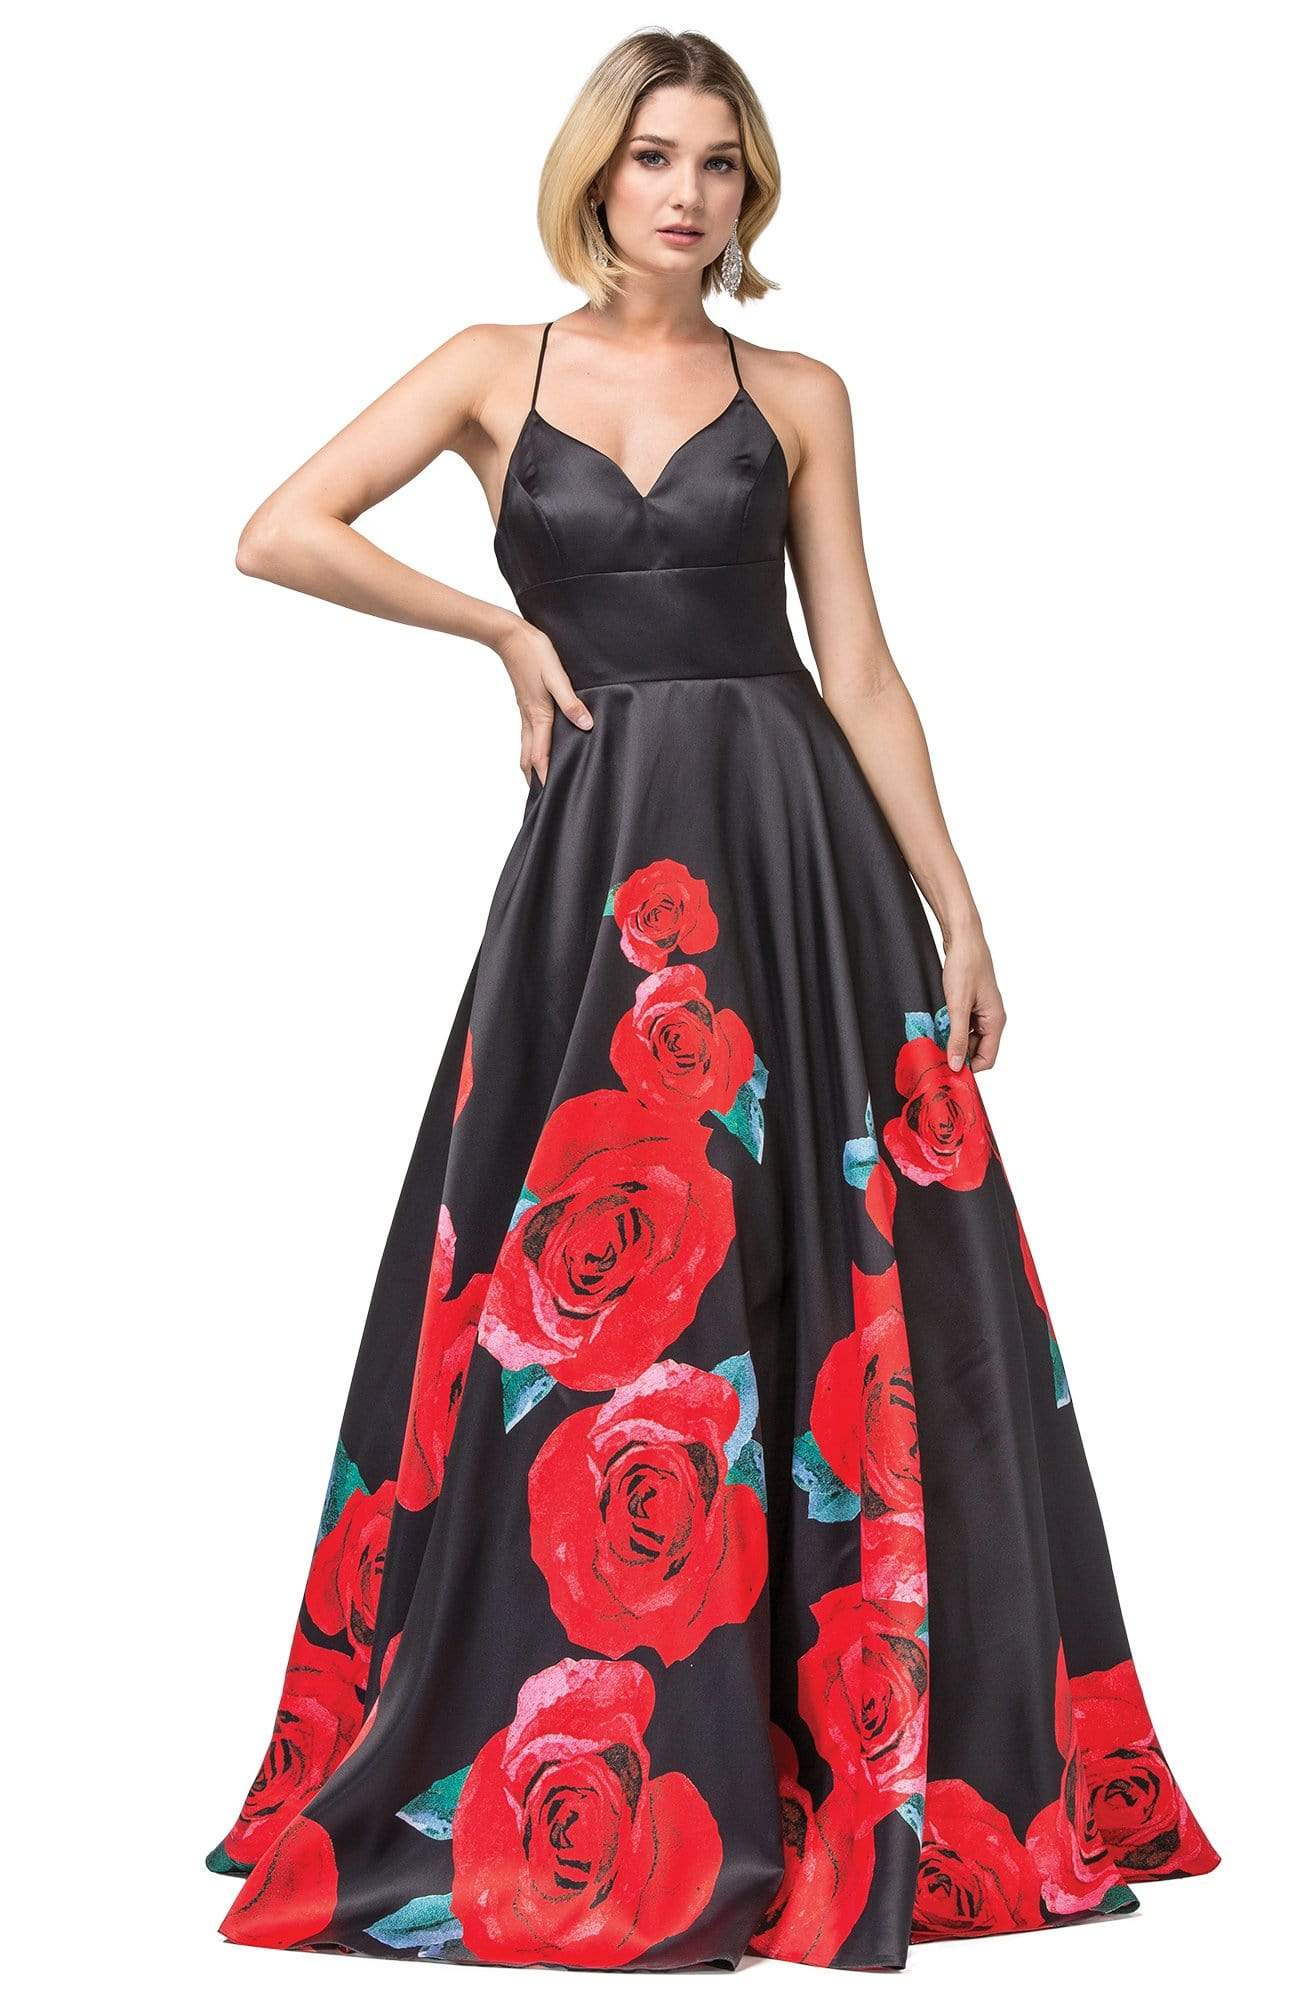 Dancing Queen - 2843 Floral V-Neck Pleated Ballgown
